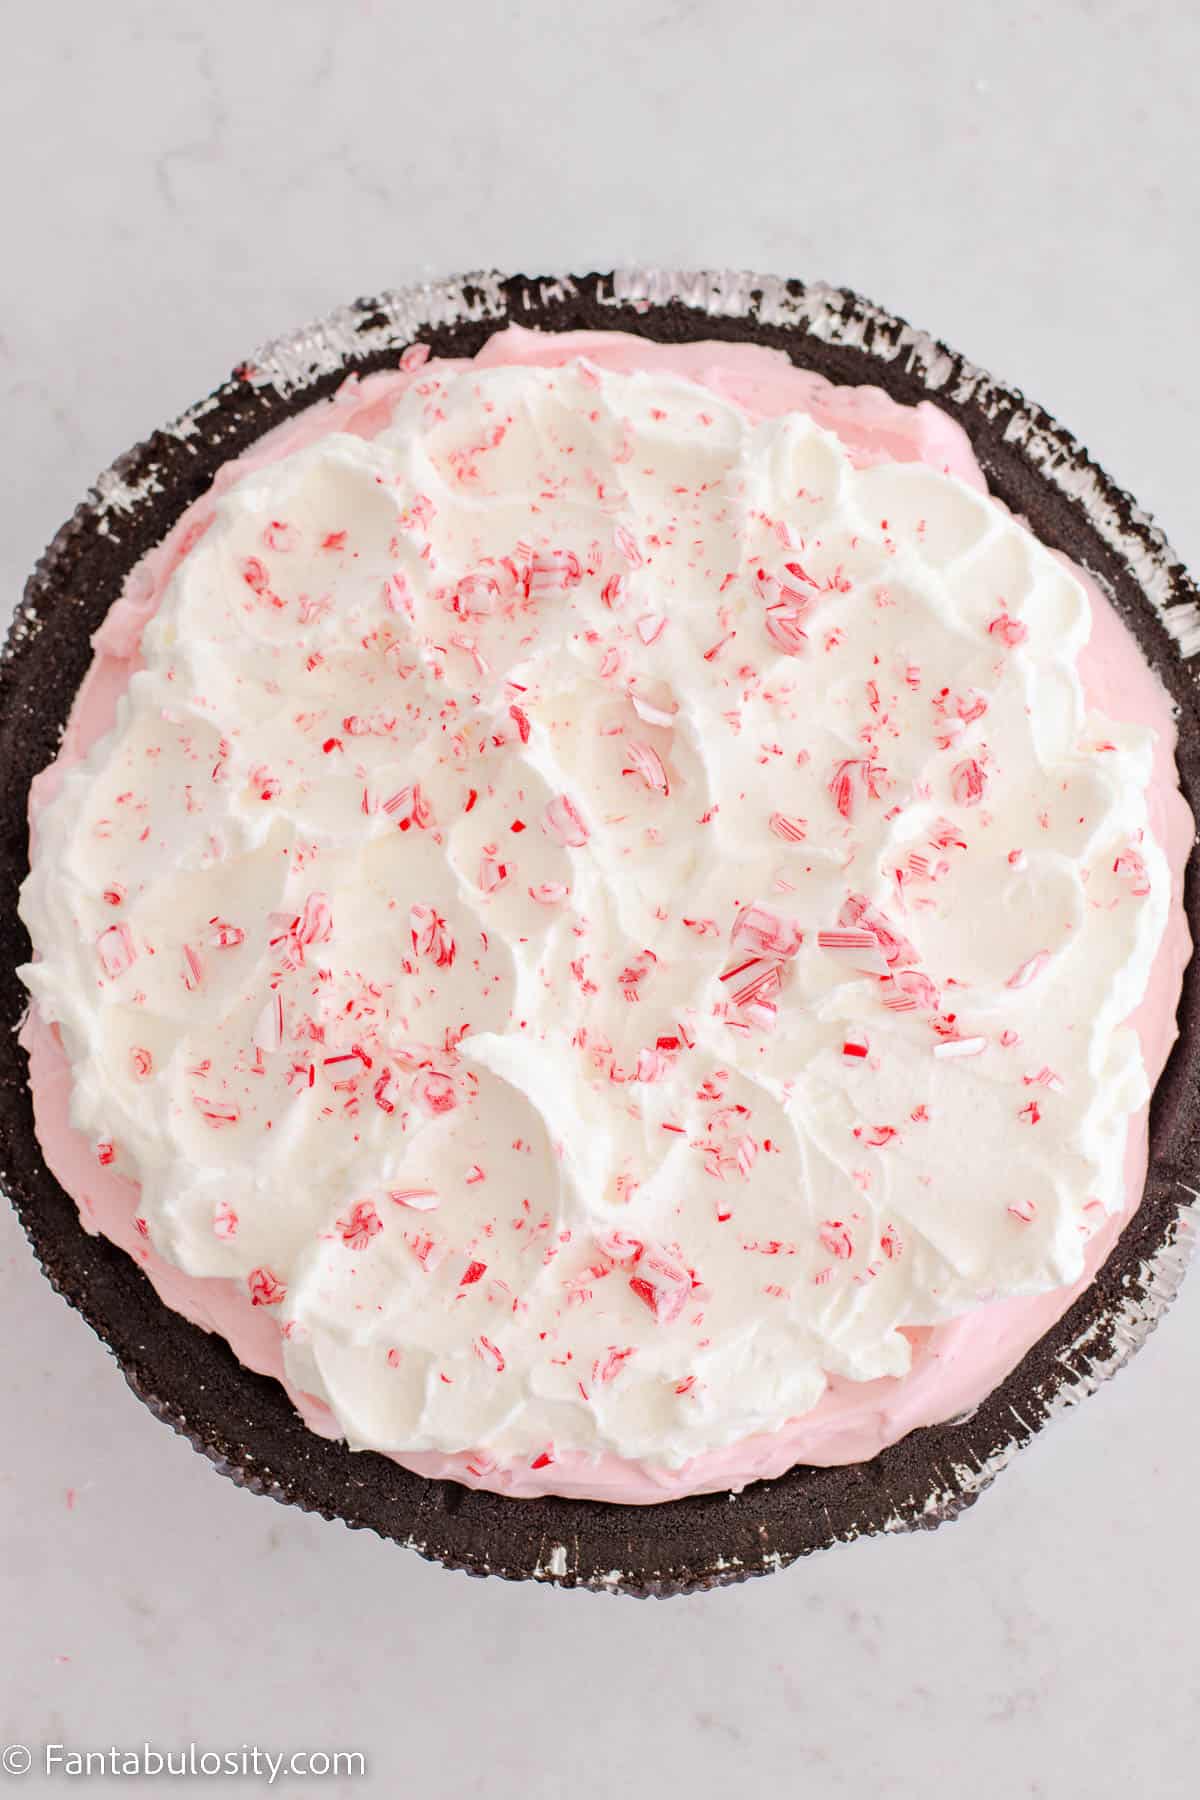 Crushed candy canes sprinkled on pie